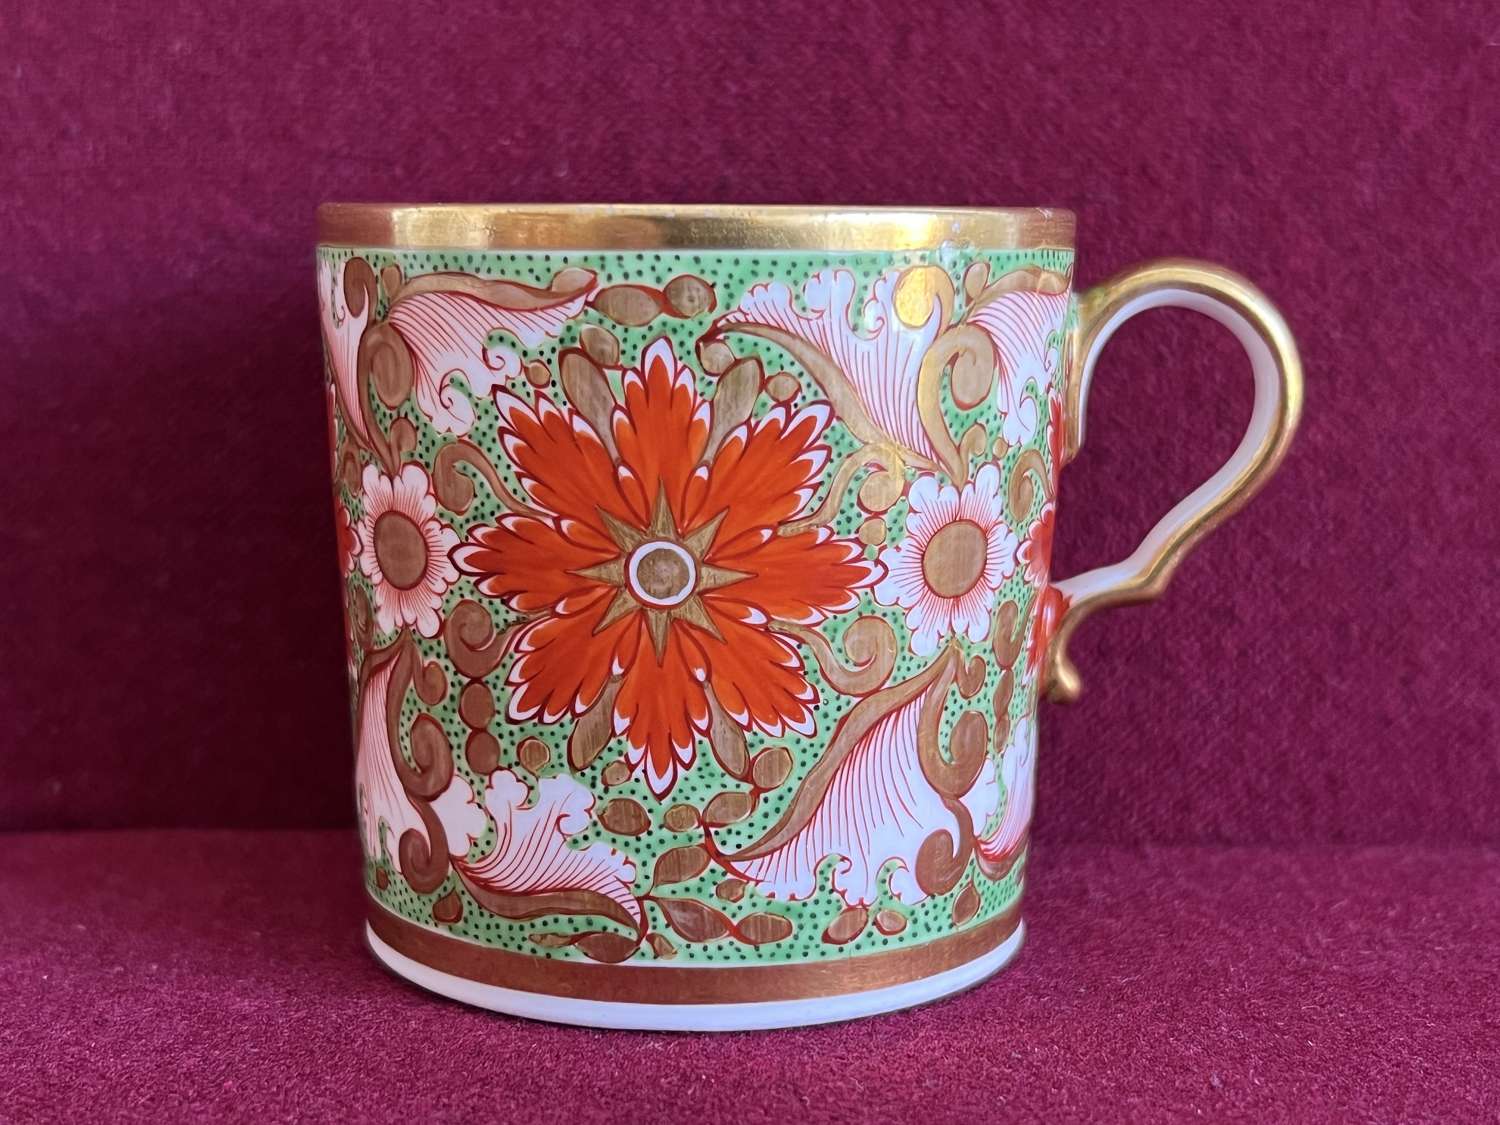 A Spode Porcelain Coffee Can in pattern 1382 c.1805-1810